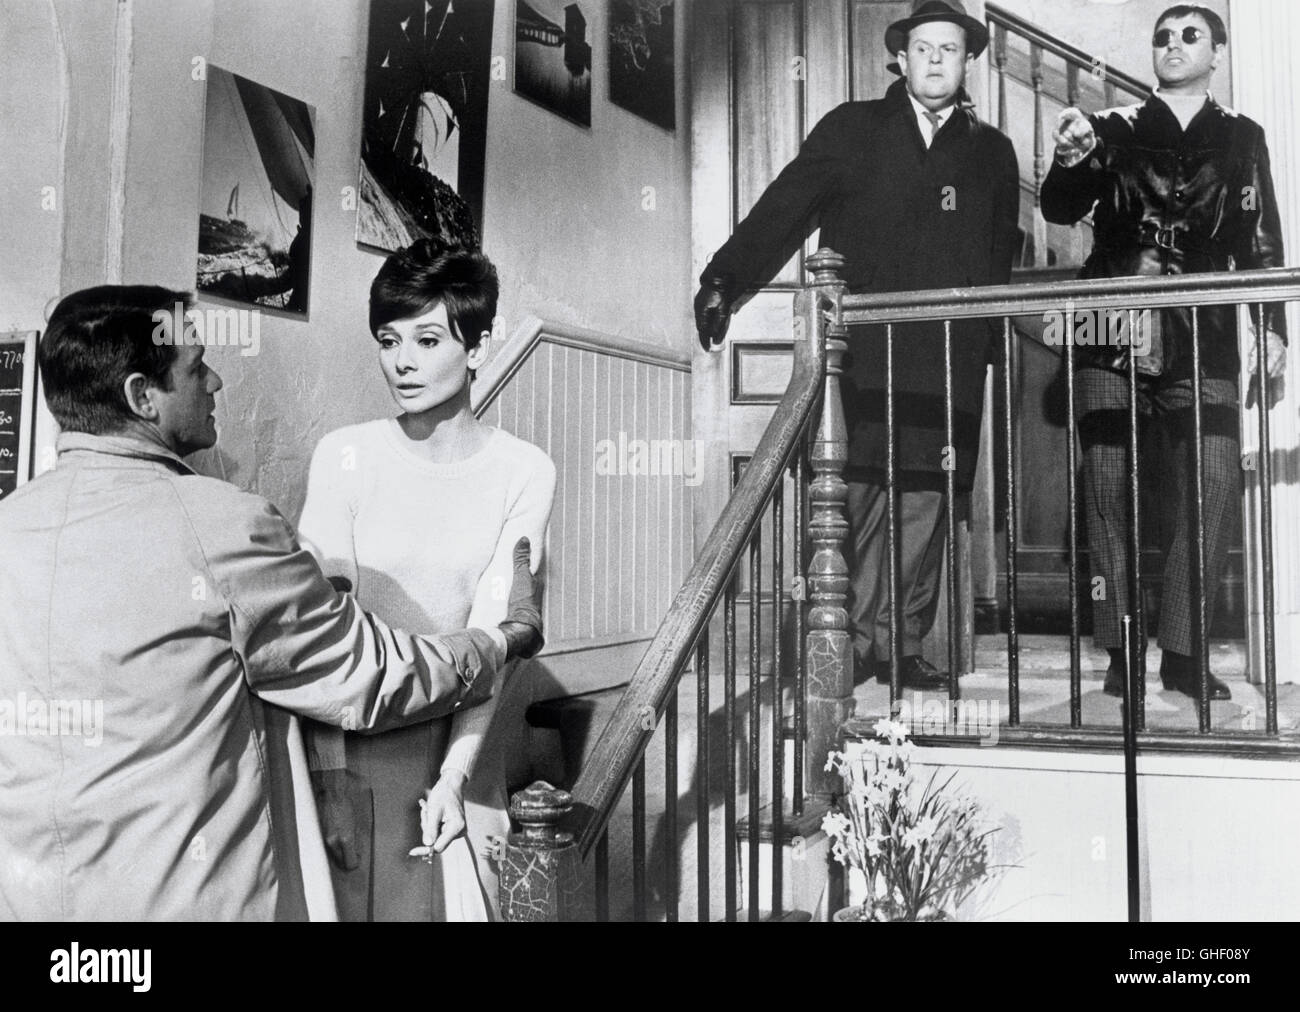 WAIT UNTIL DARK USA 1967 Terence Young RICHARD CRENNA as Mike Talman, AUDREY HEPBURN as blind Susy Hendrix, JACK WESTON as Carlino, ALAN ARKIN as Harry Roat Regie: Terence Young Stock Photo